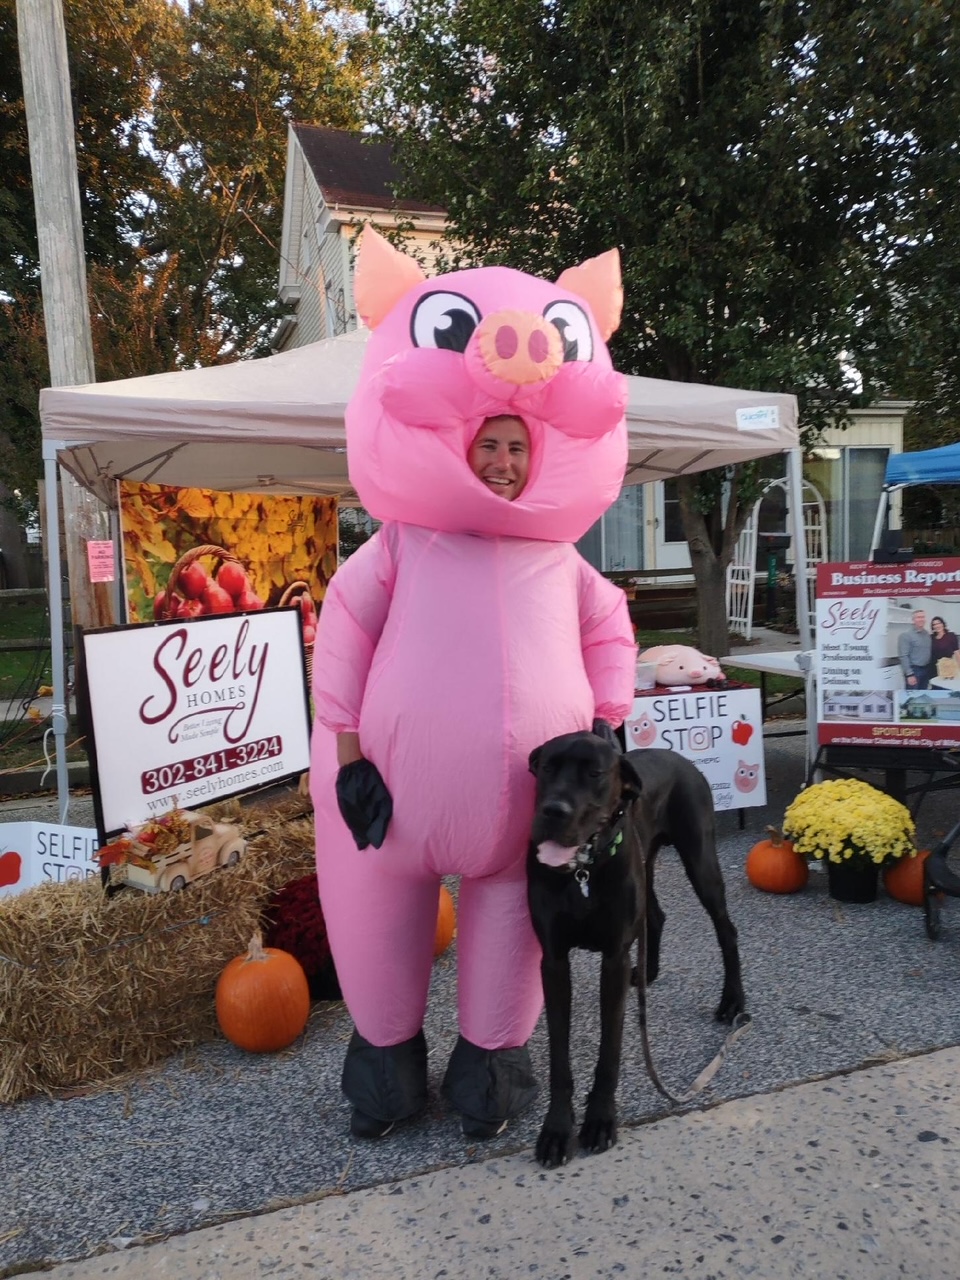 Even dogs loved Scrappy the Pig